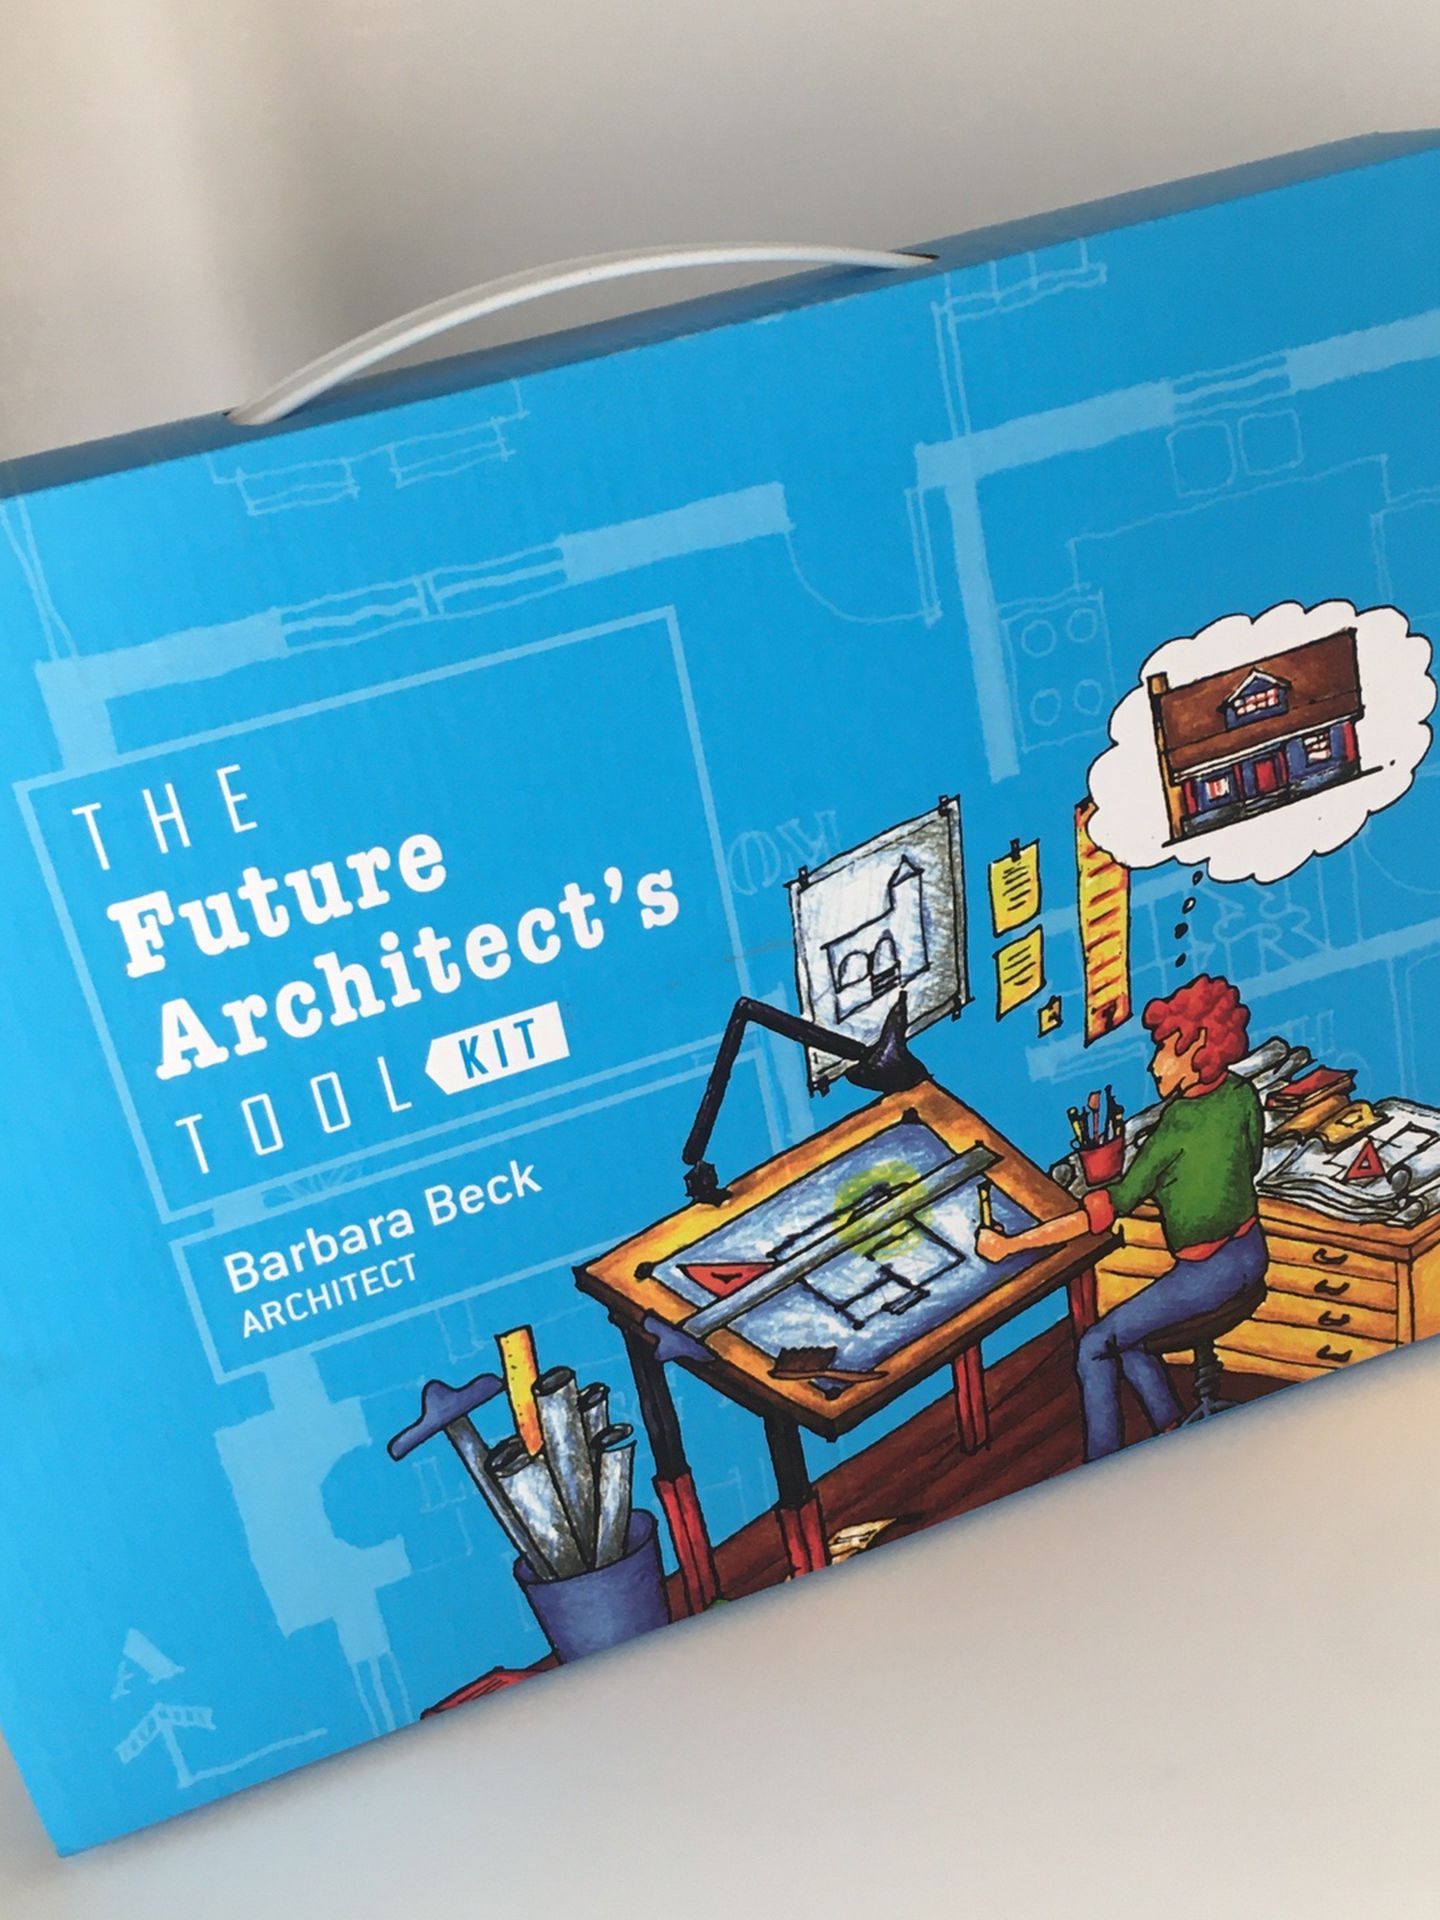 The Future Architect's Tool Kit by Barbara Beck